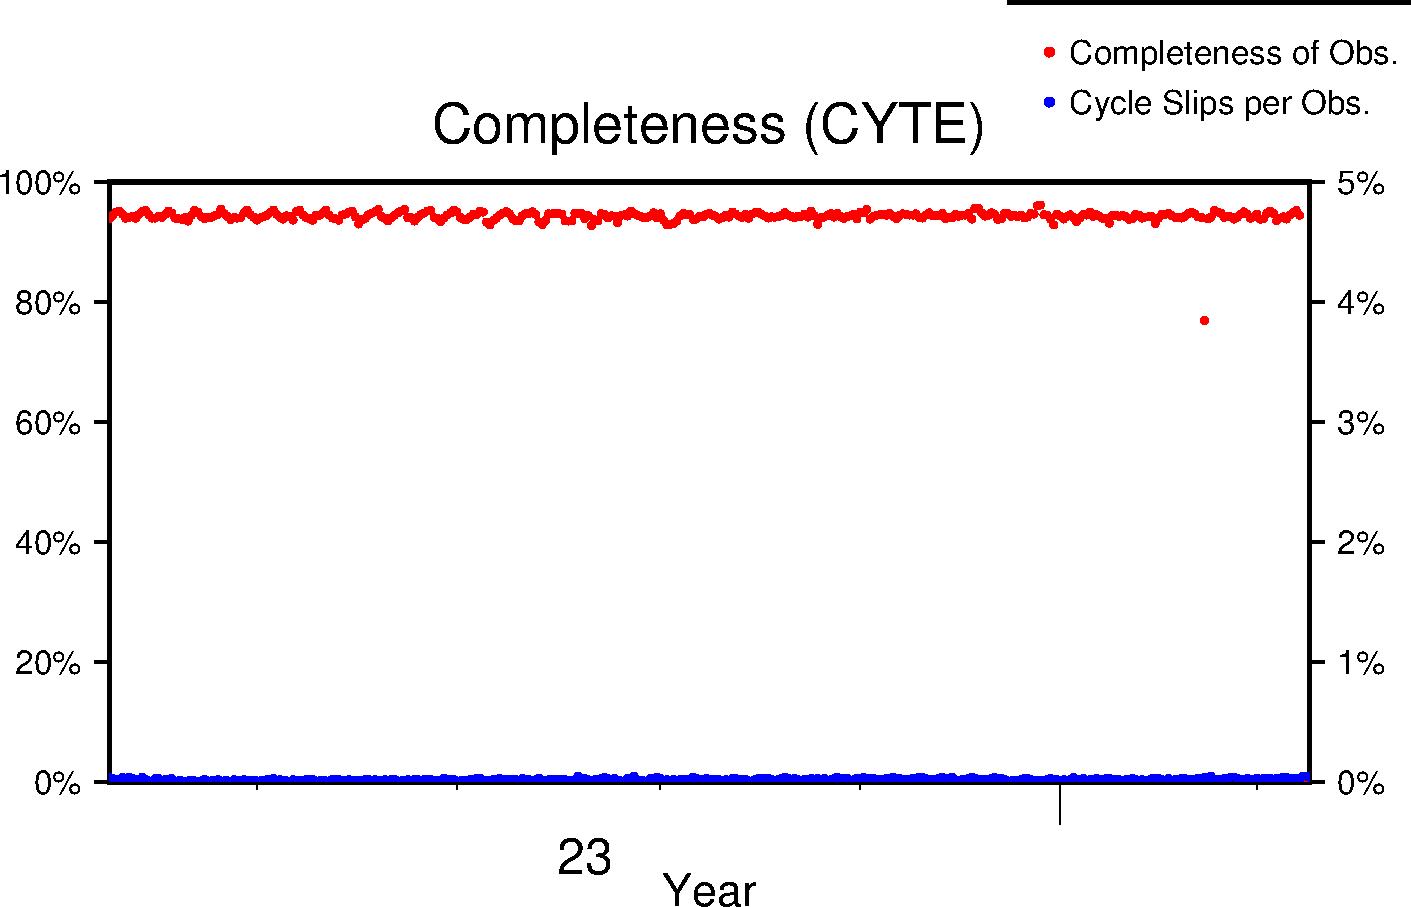 CYTE completeness lifetime